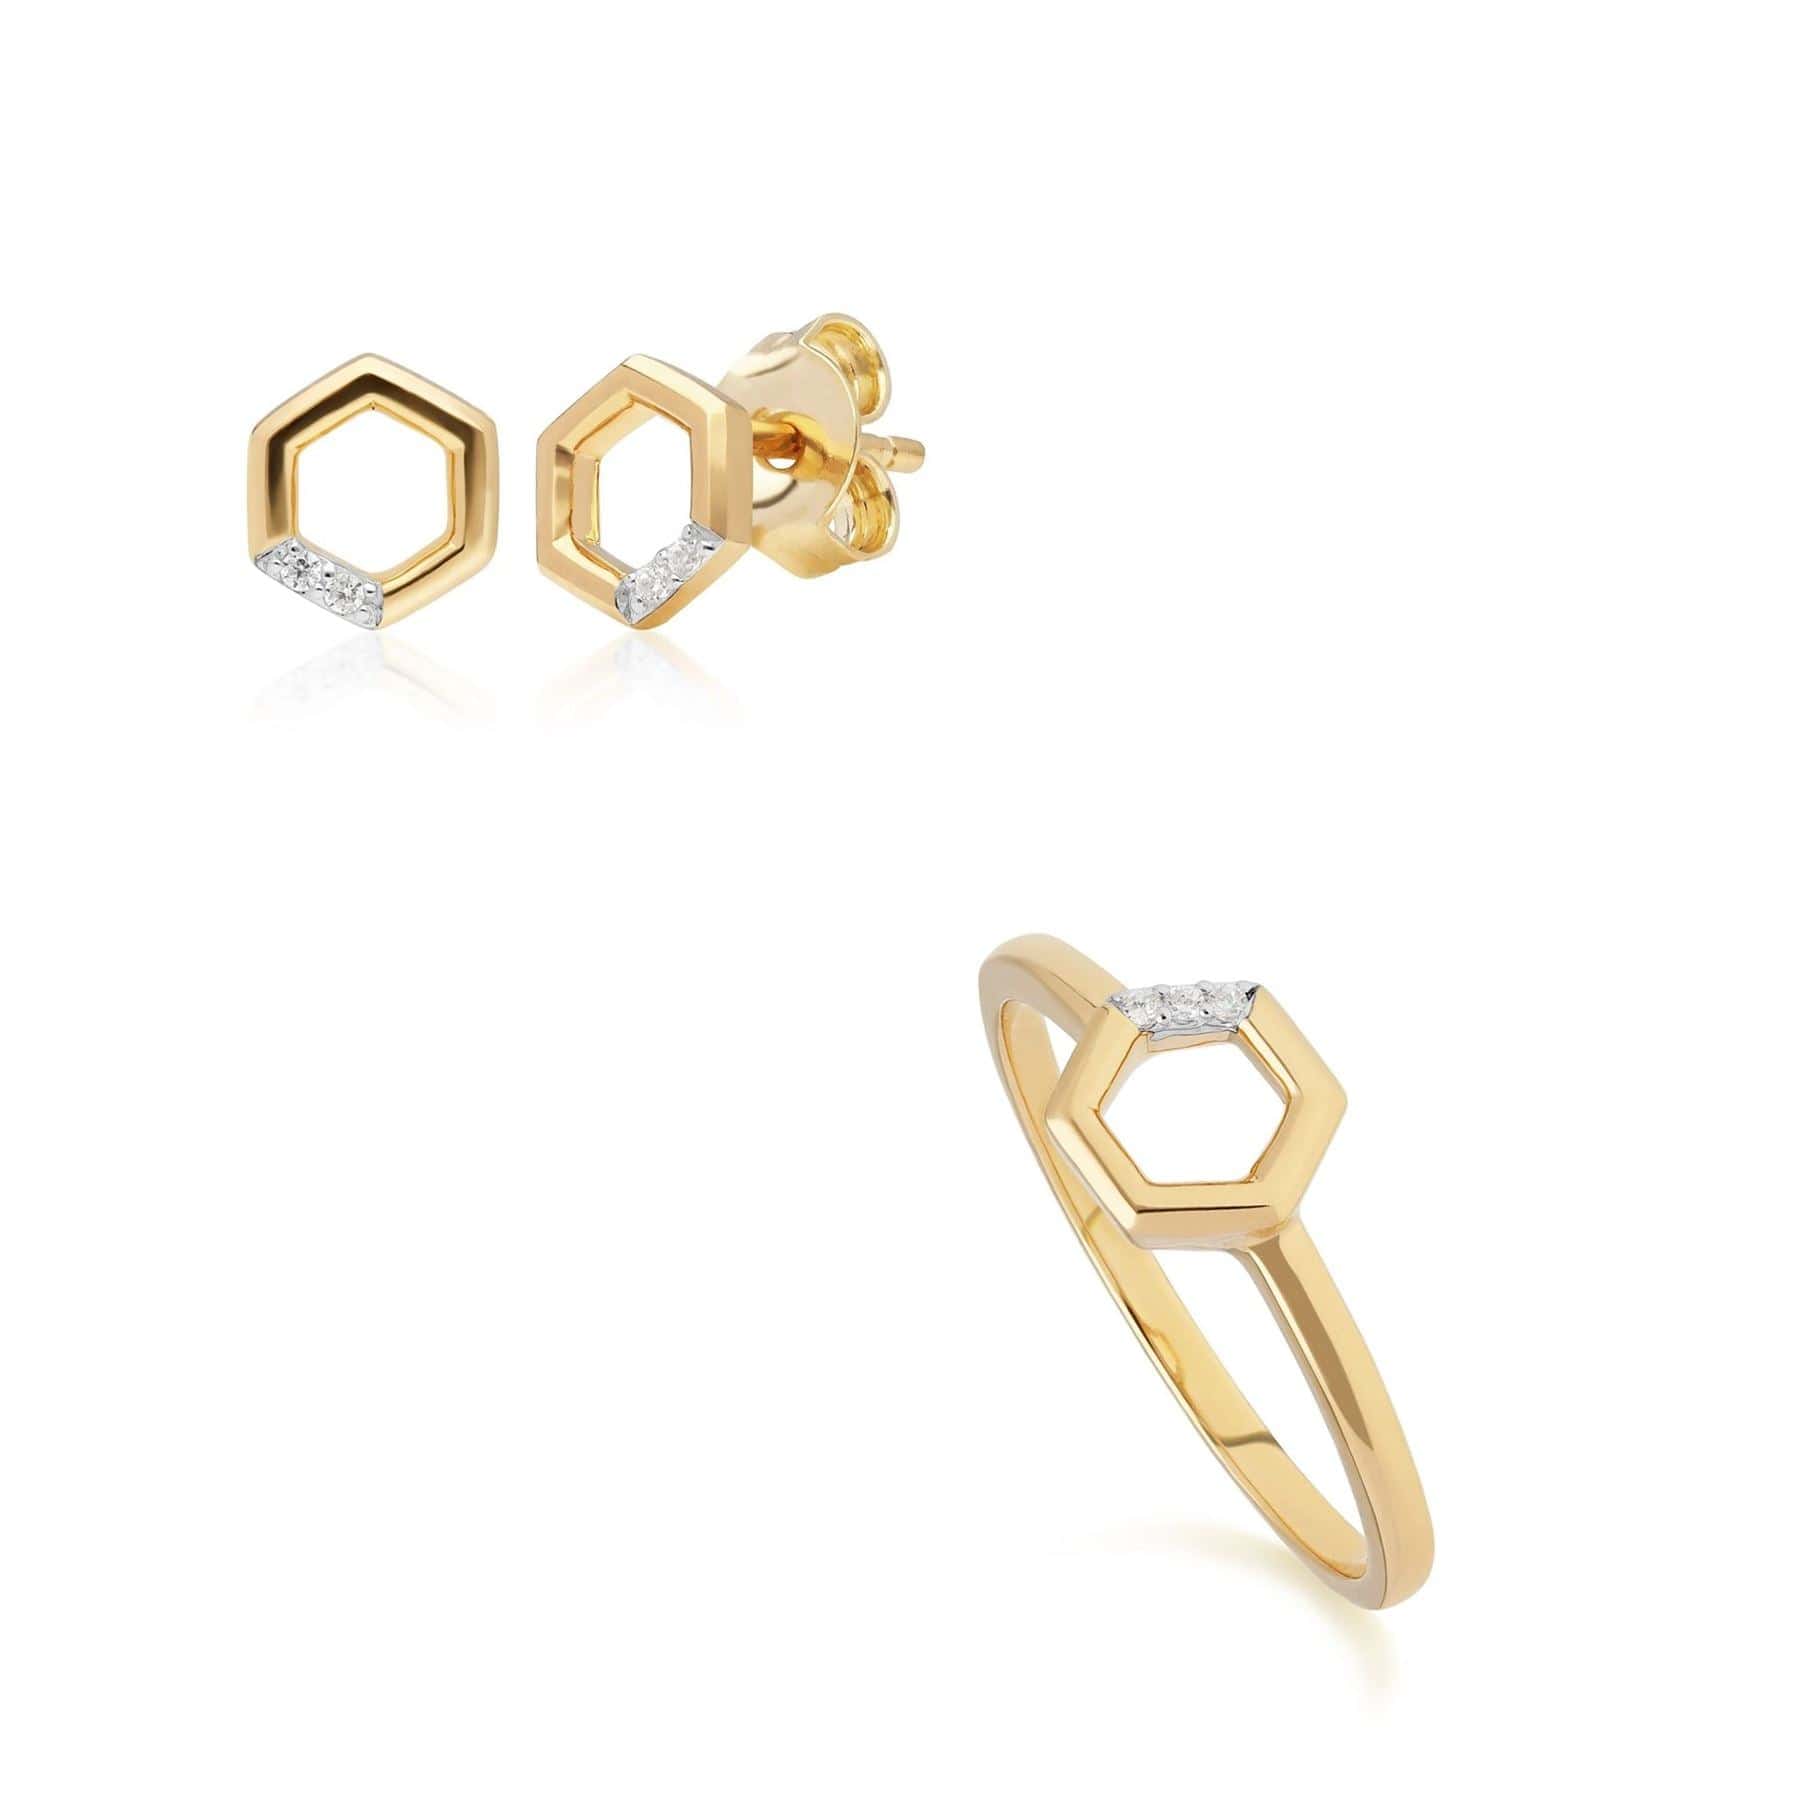 191E0392029-191R0896029 Diamond Pave Hexagon Stud Earring & Ring Set in 9ct Yellow Gold 1